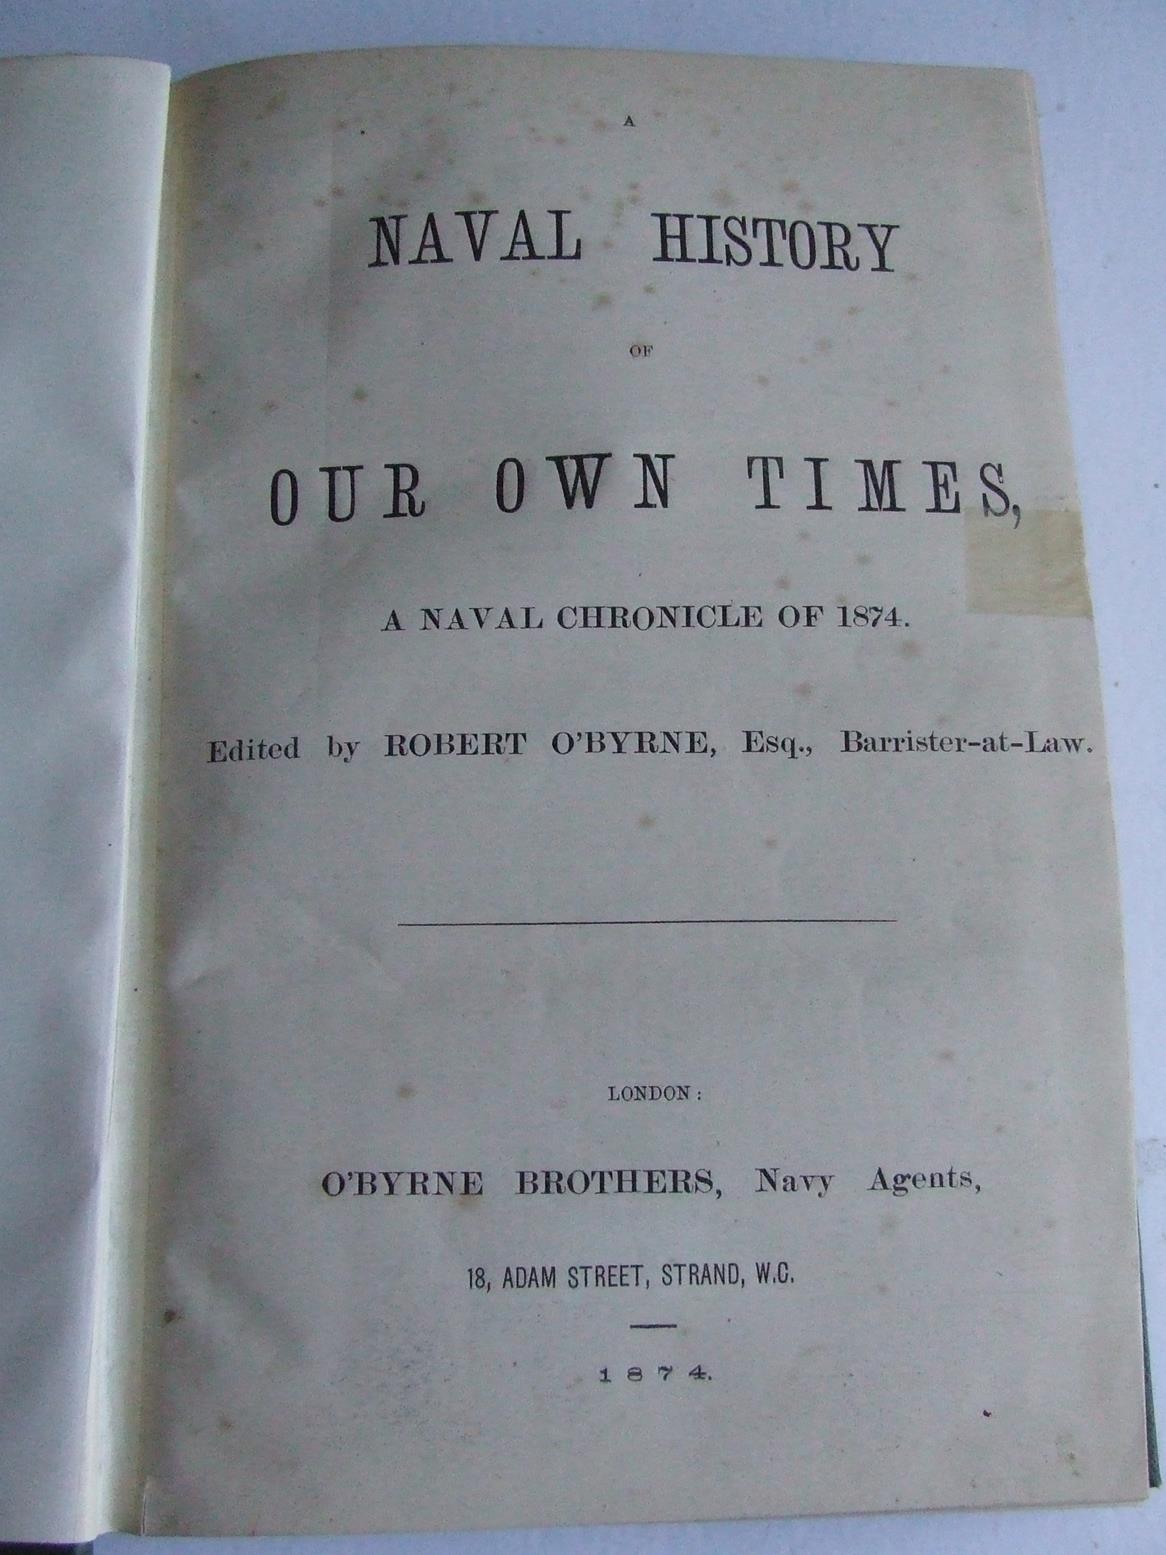 A Naval History of Our Own Times